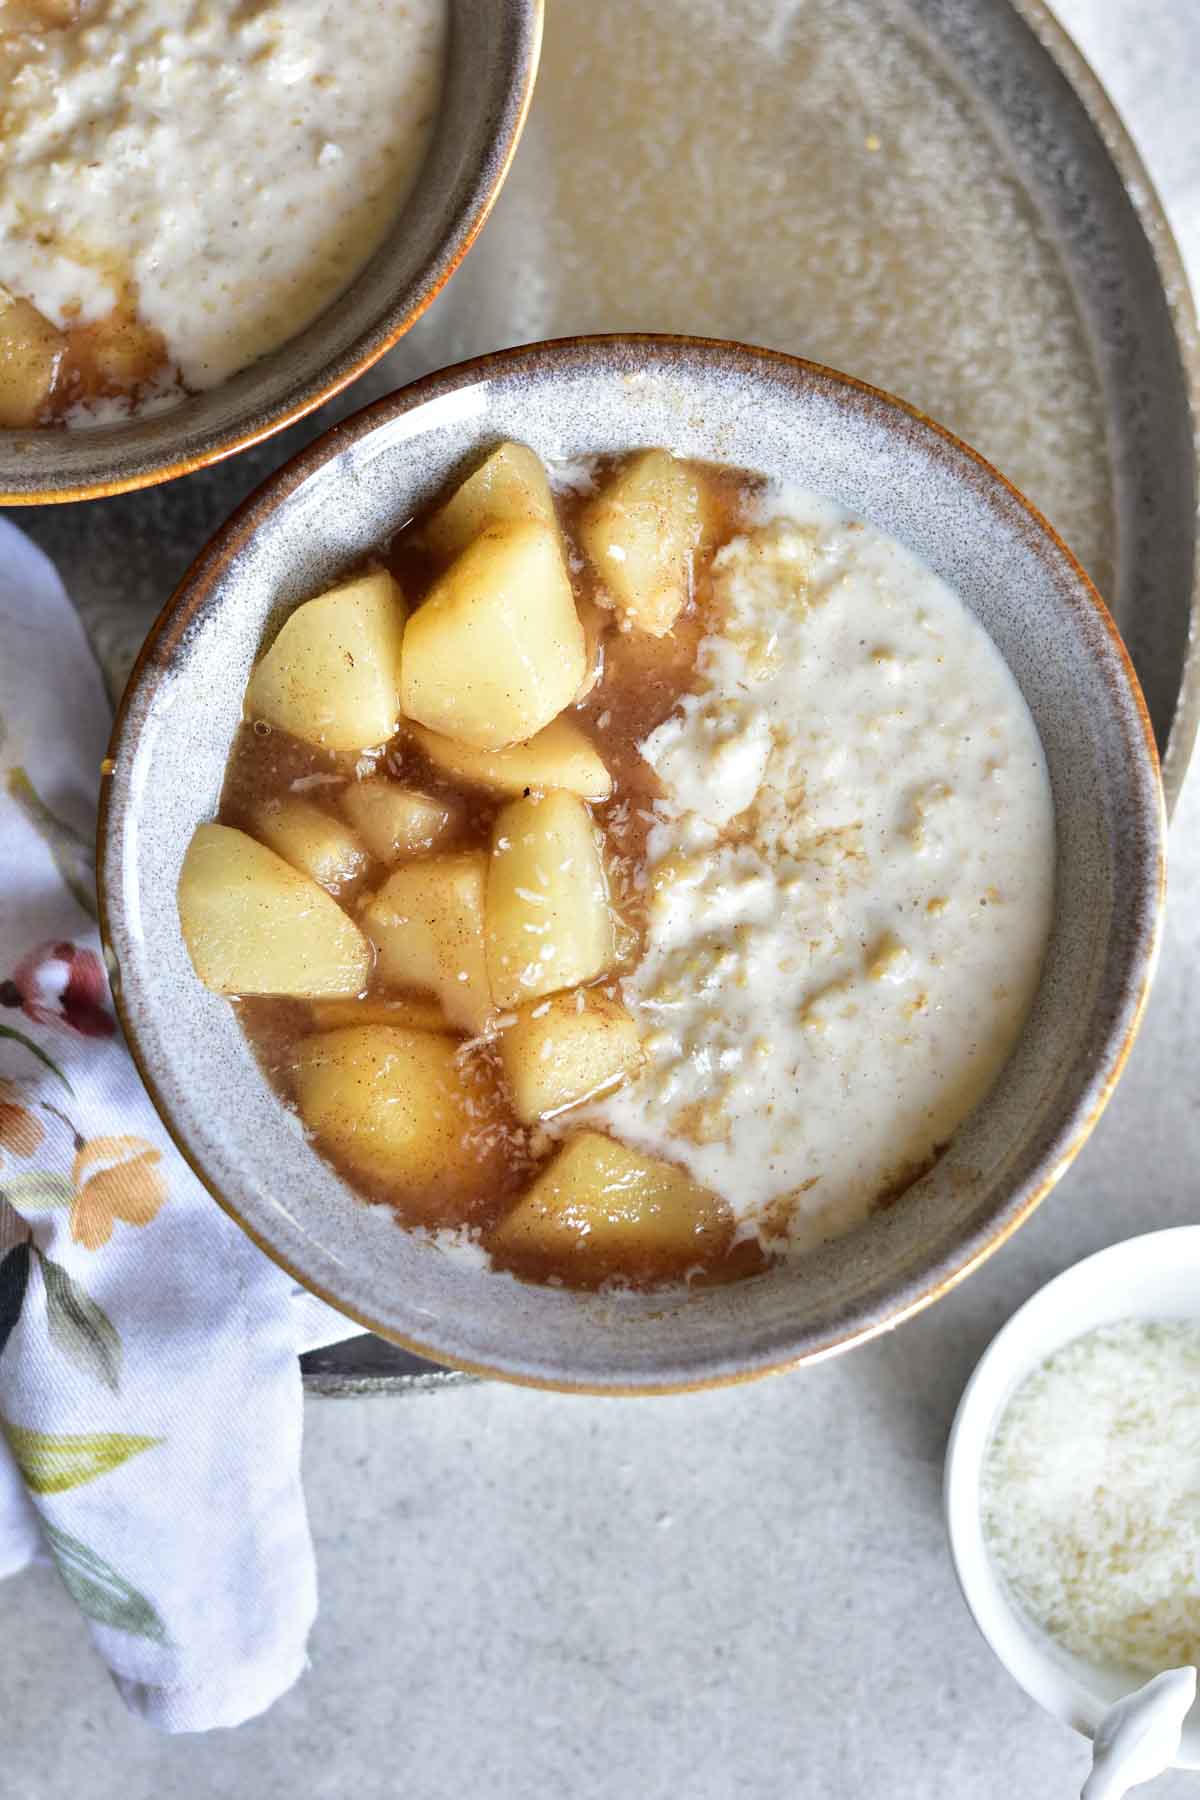 Coconut oatmeal with syrupy pears in a grey bowl.